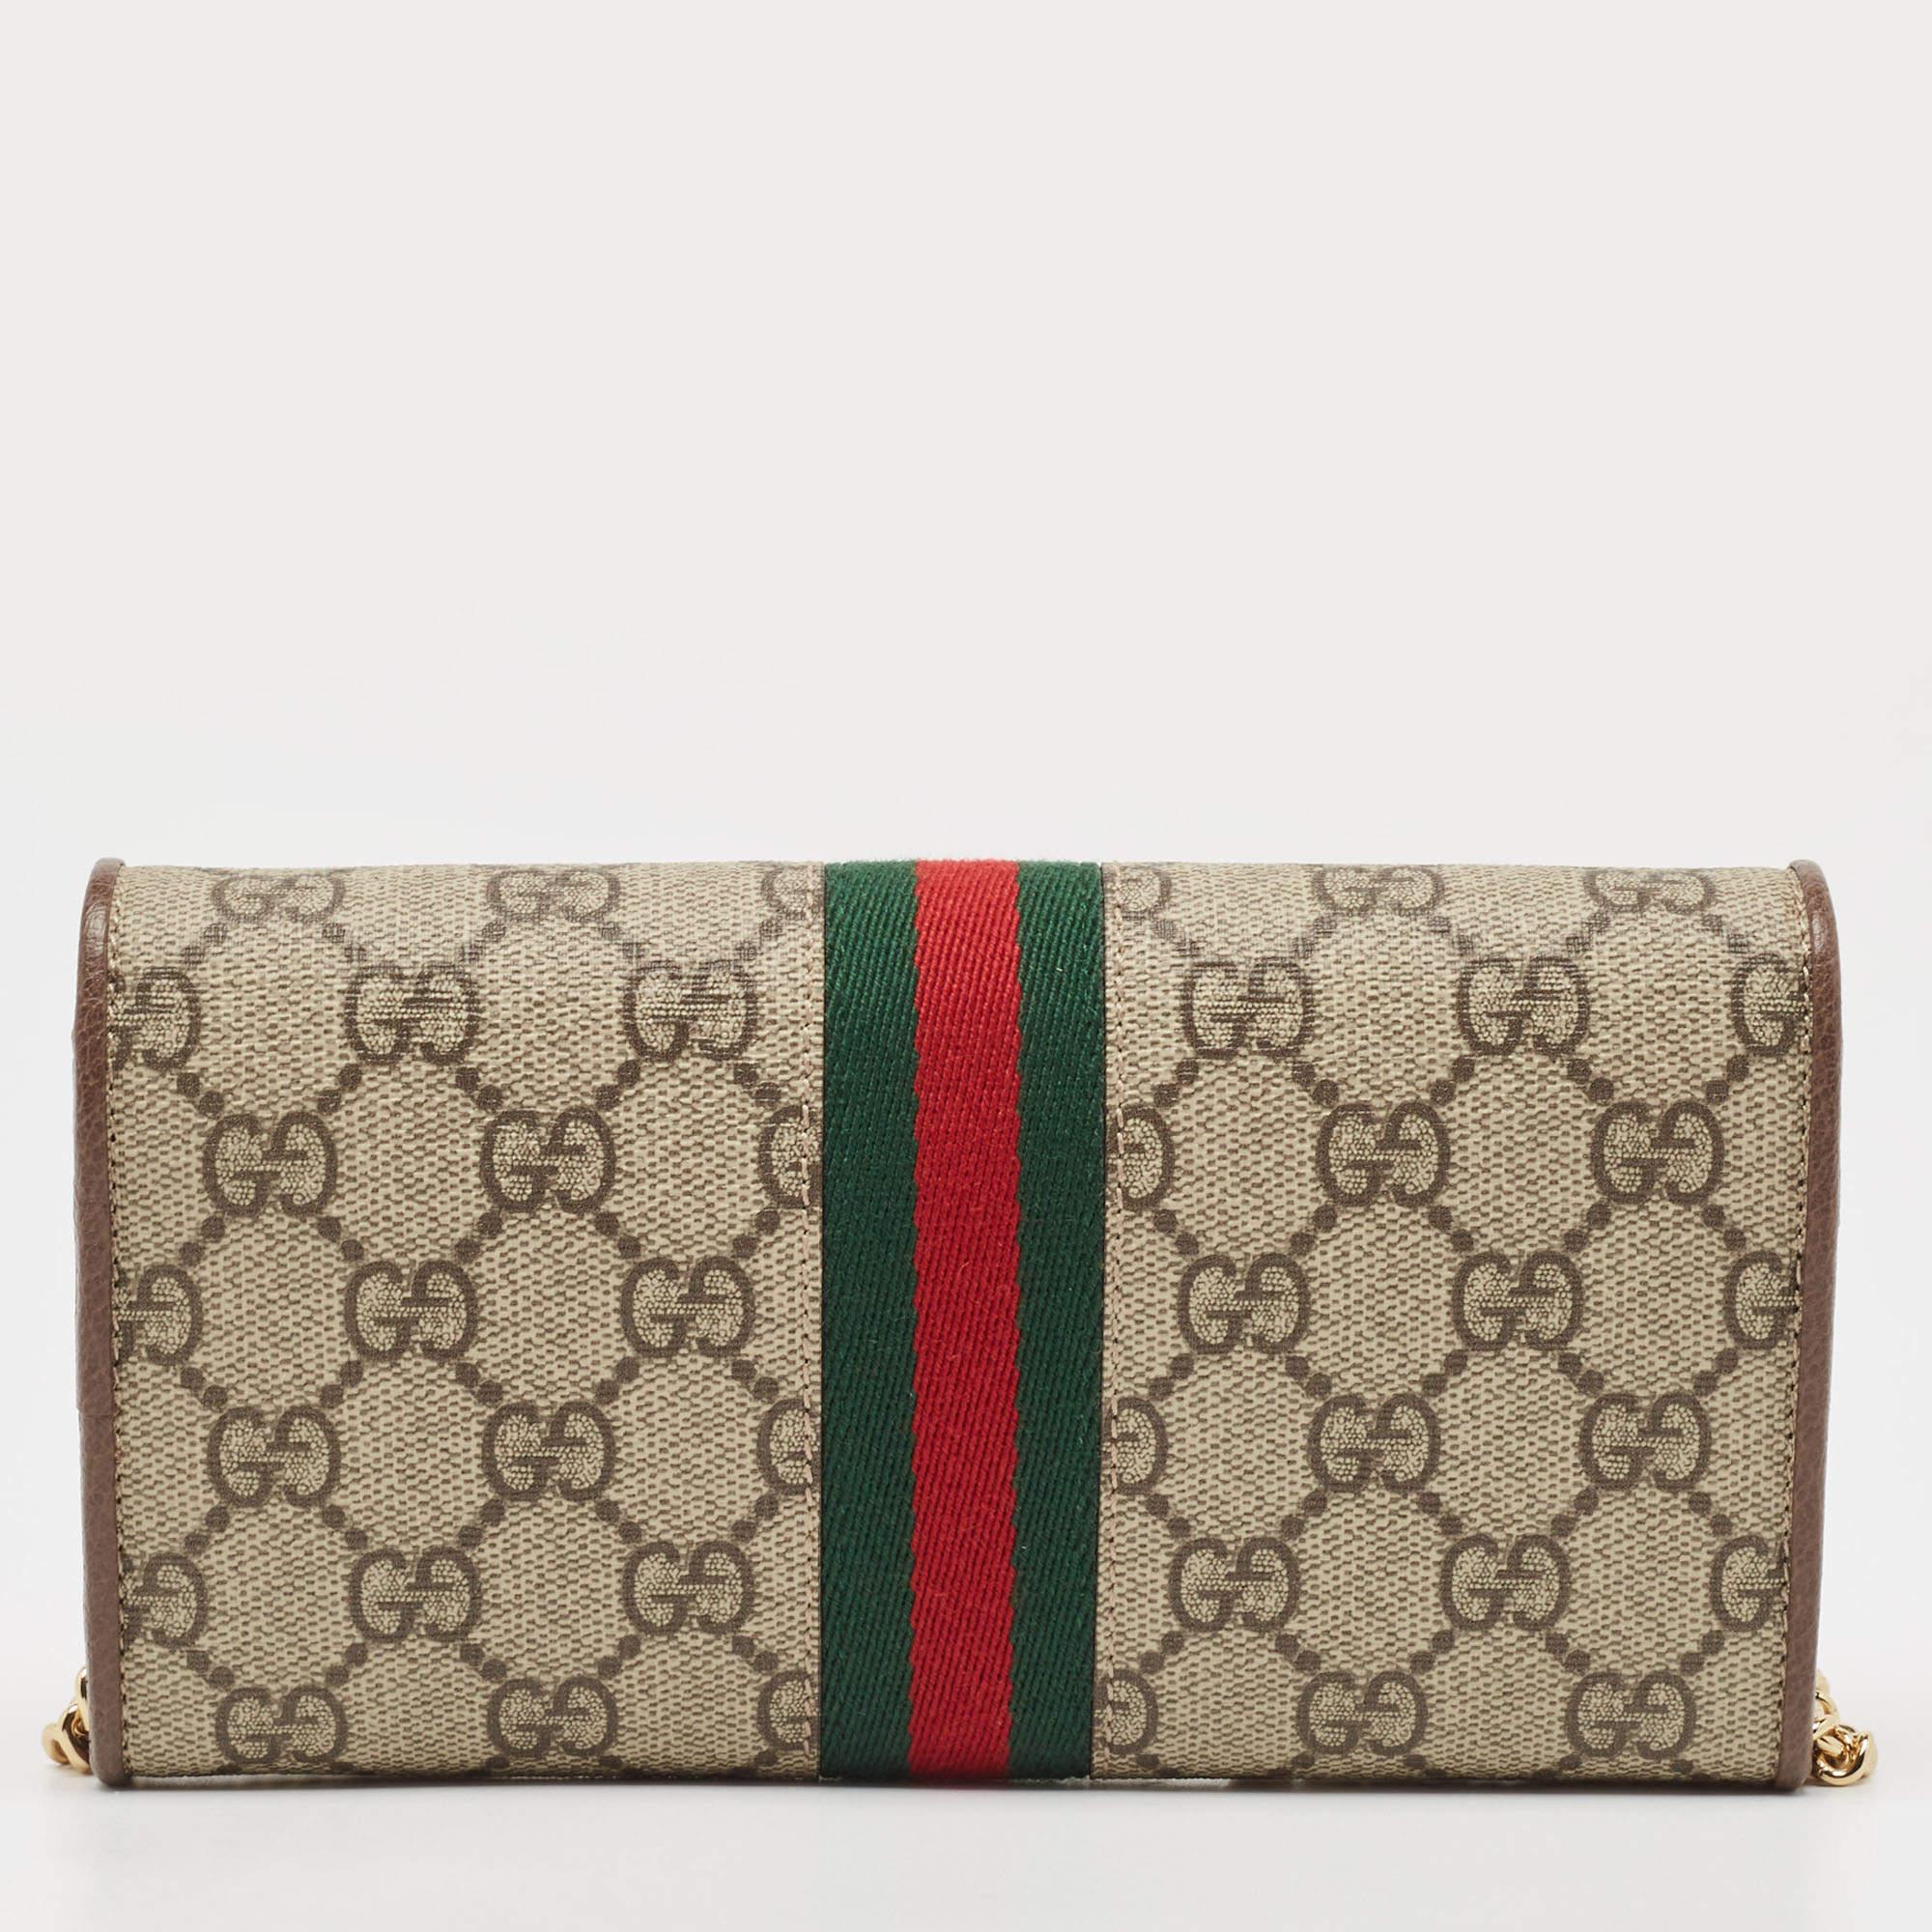 This Gucci wallet on chain is conveniently designed for easy wear. It comes with a well-spaced interior for you to arrange your cards and cash neatly. This stylish piece is complete with a chain link.

Includes: Original Dustbag, Detachable Chain

